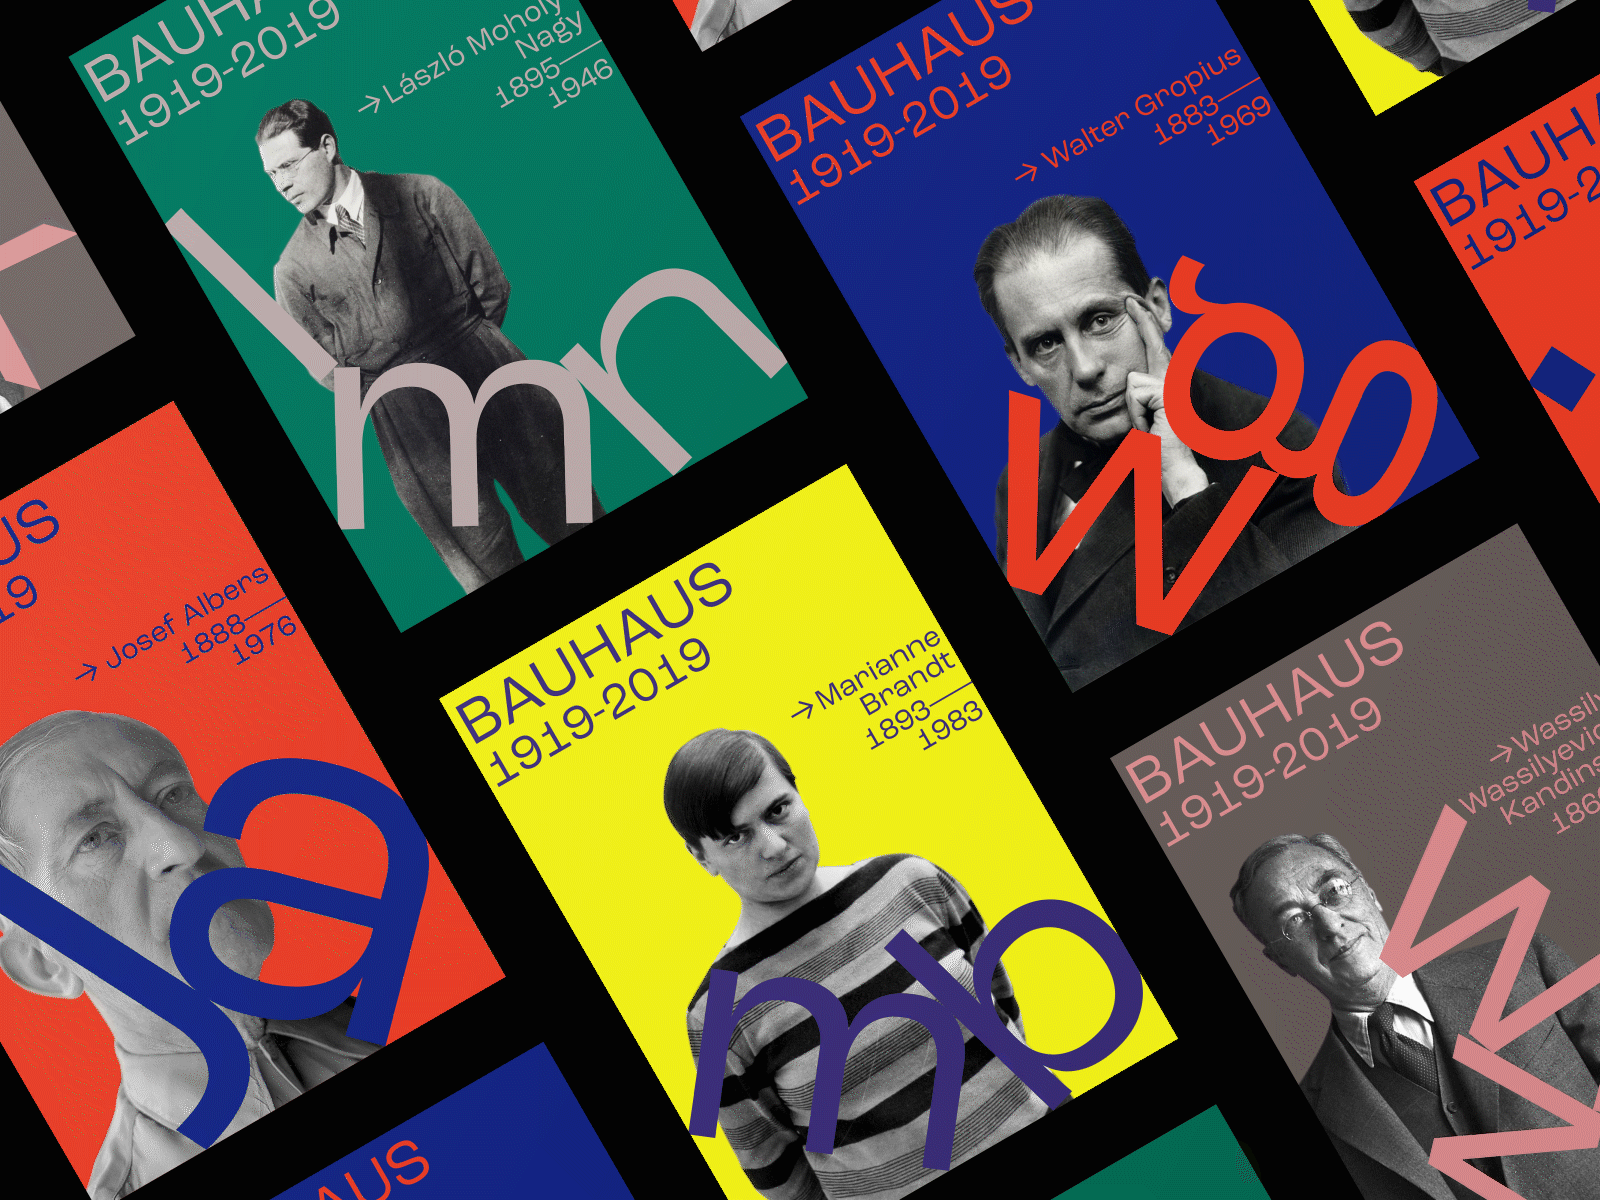 From Dessau with Love! Another Poster Series for Bauhaus bauhaus bauhaus100 josef albers marianne brandt moholy nagy poster poster a day poster challenge poster collection poster design walter gropius wassily kandinsky